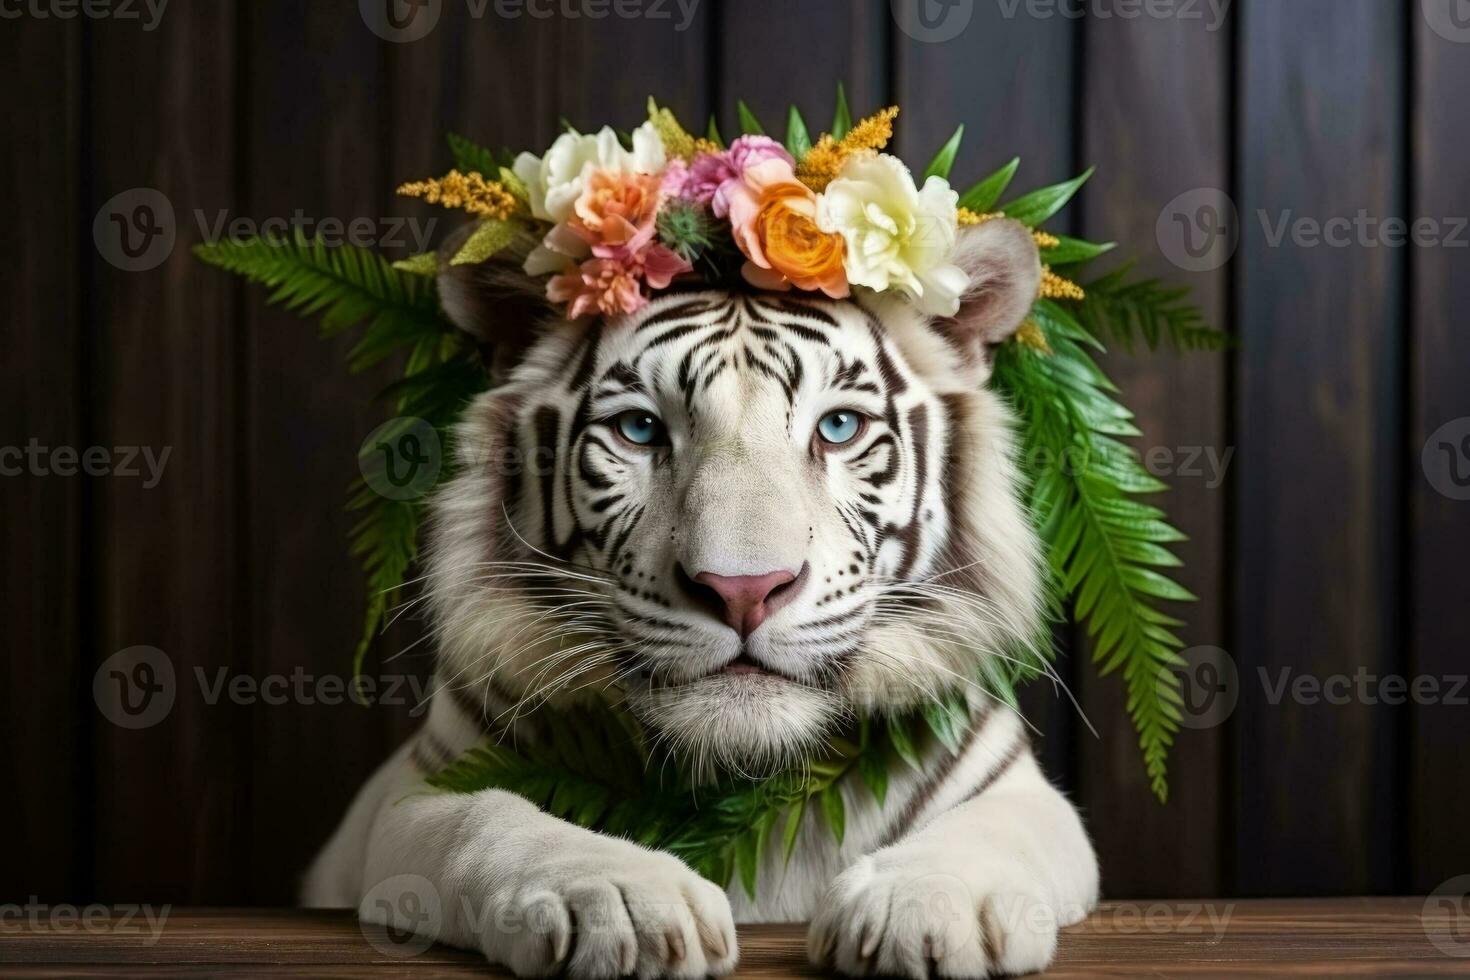 White Bengal Tiger with wreath collar and festive hat greets New Year photo